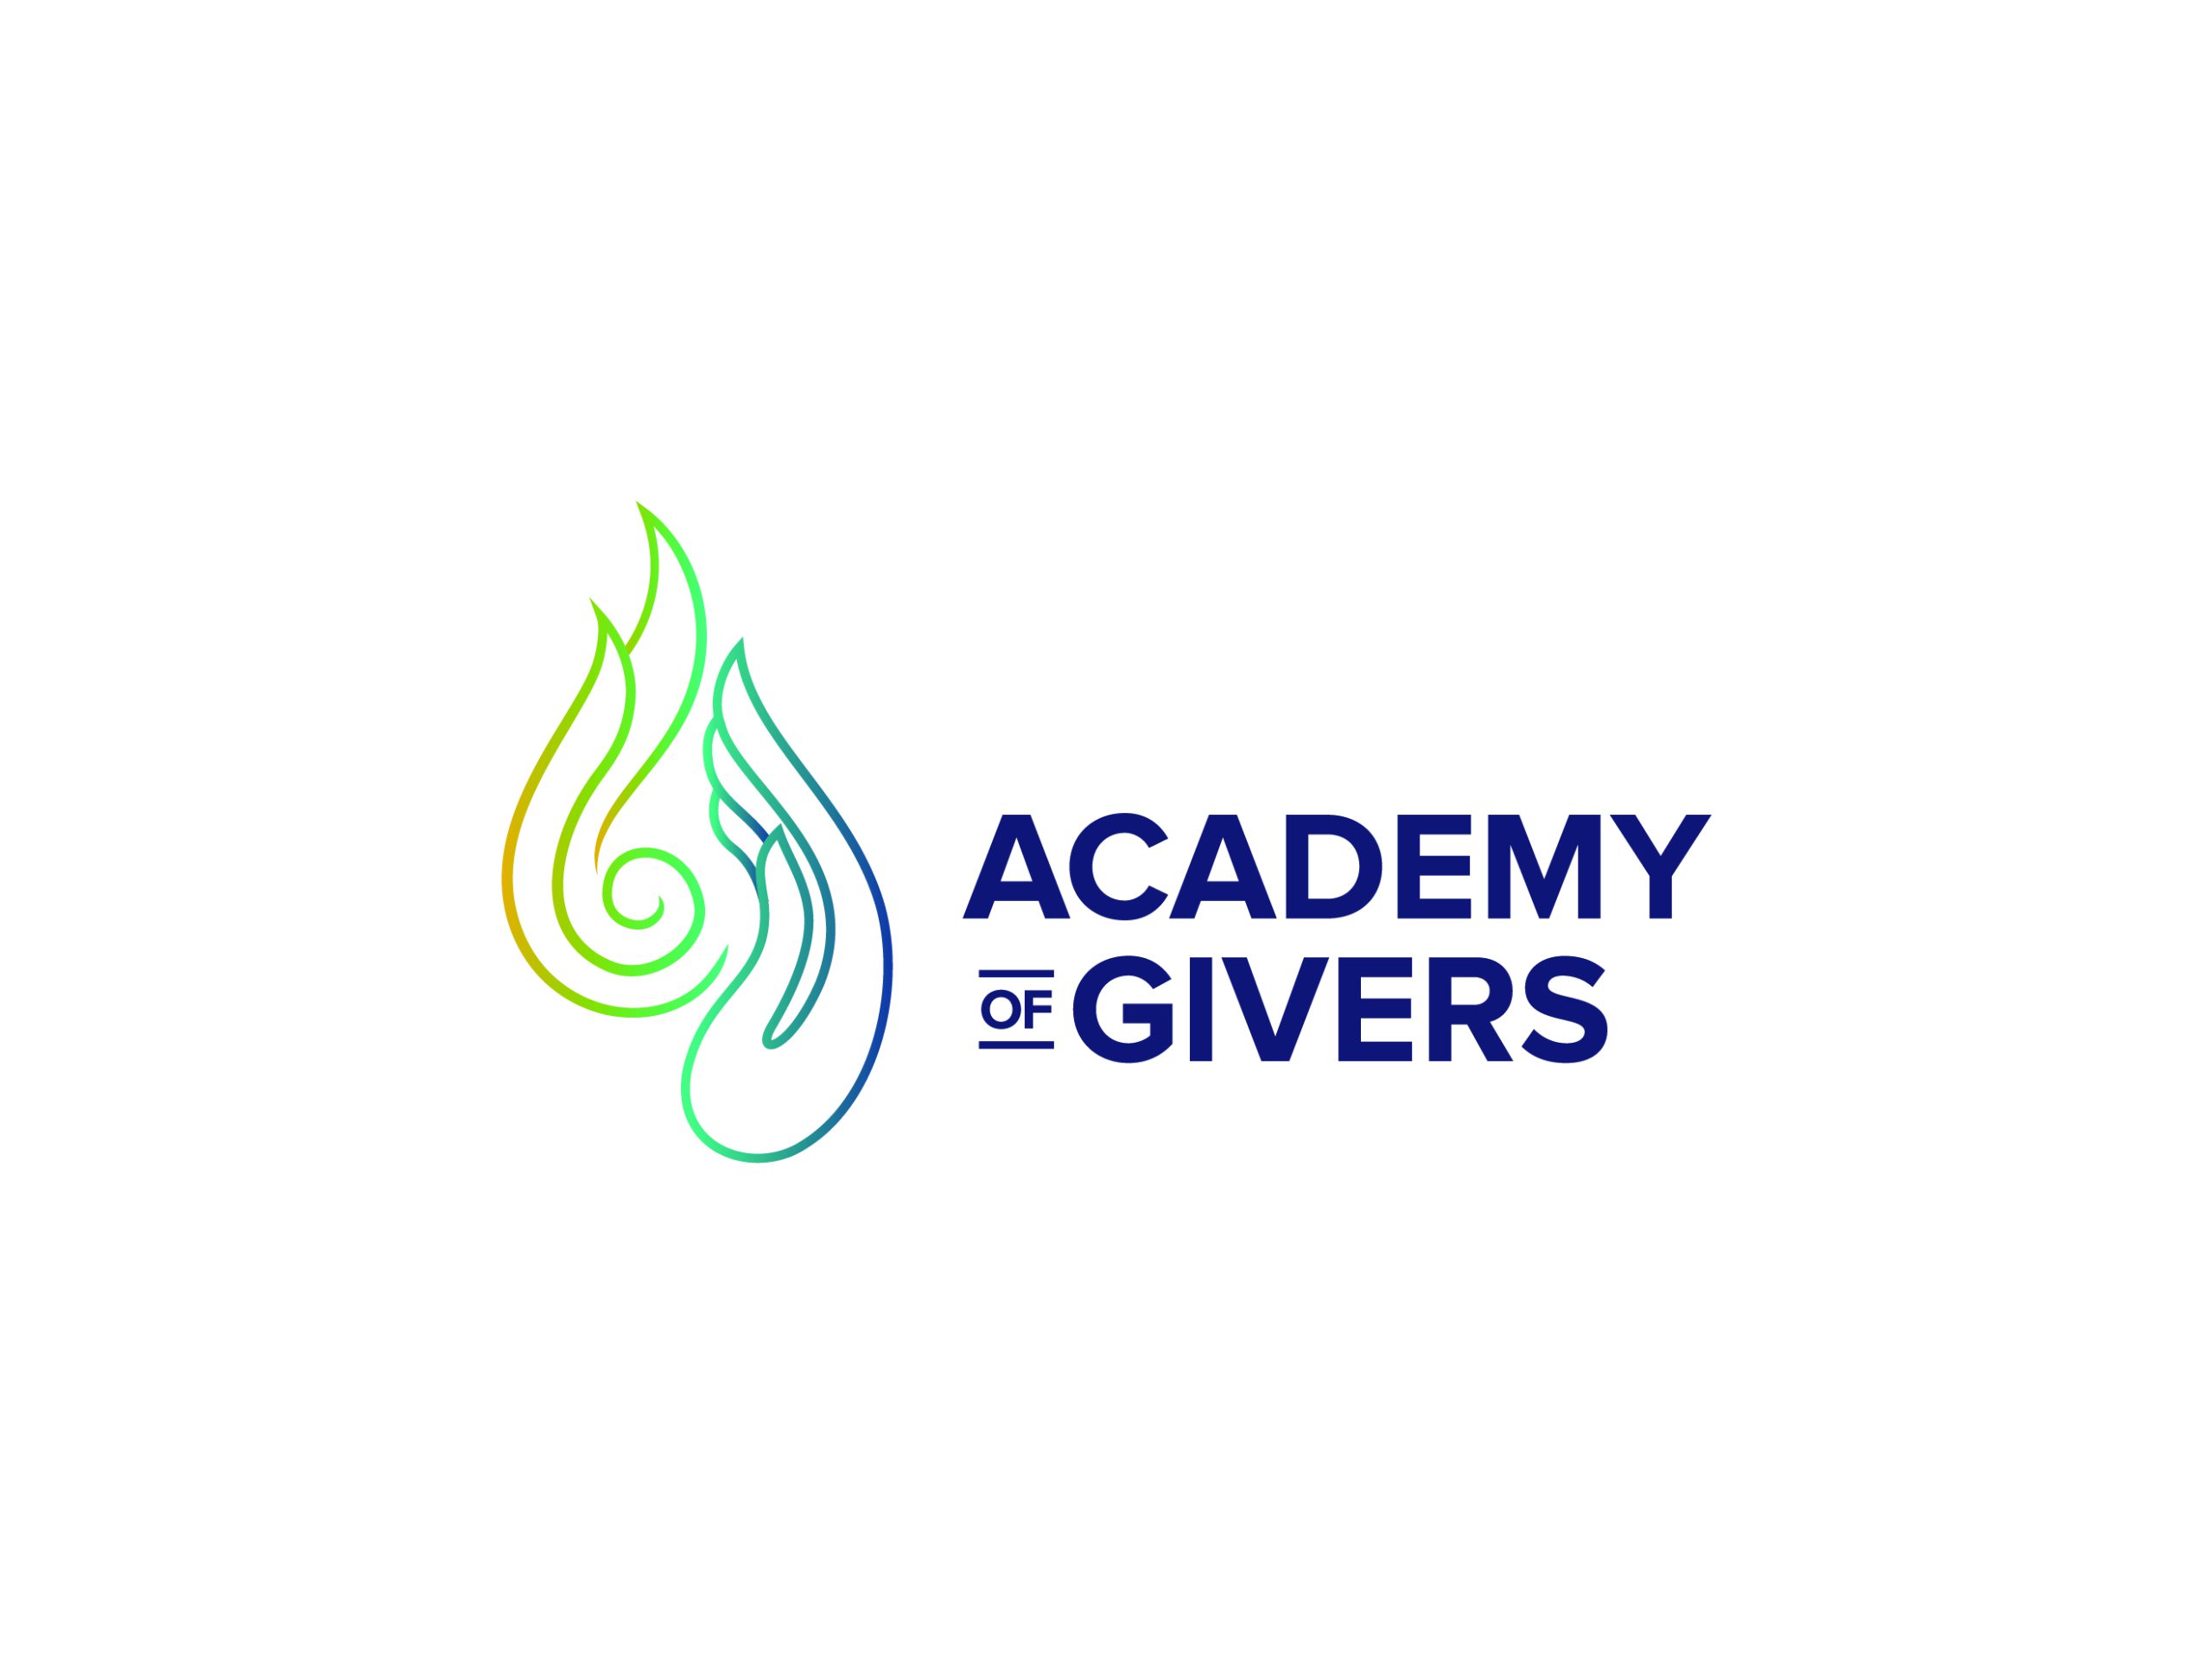 Academy of Givers